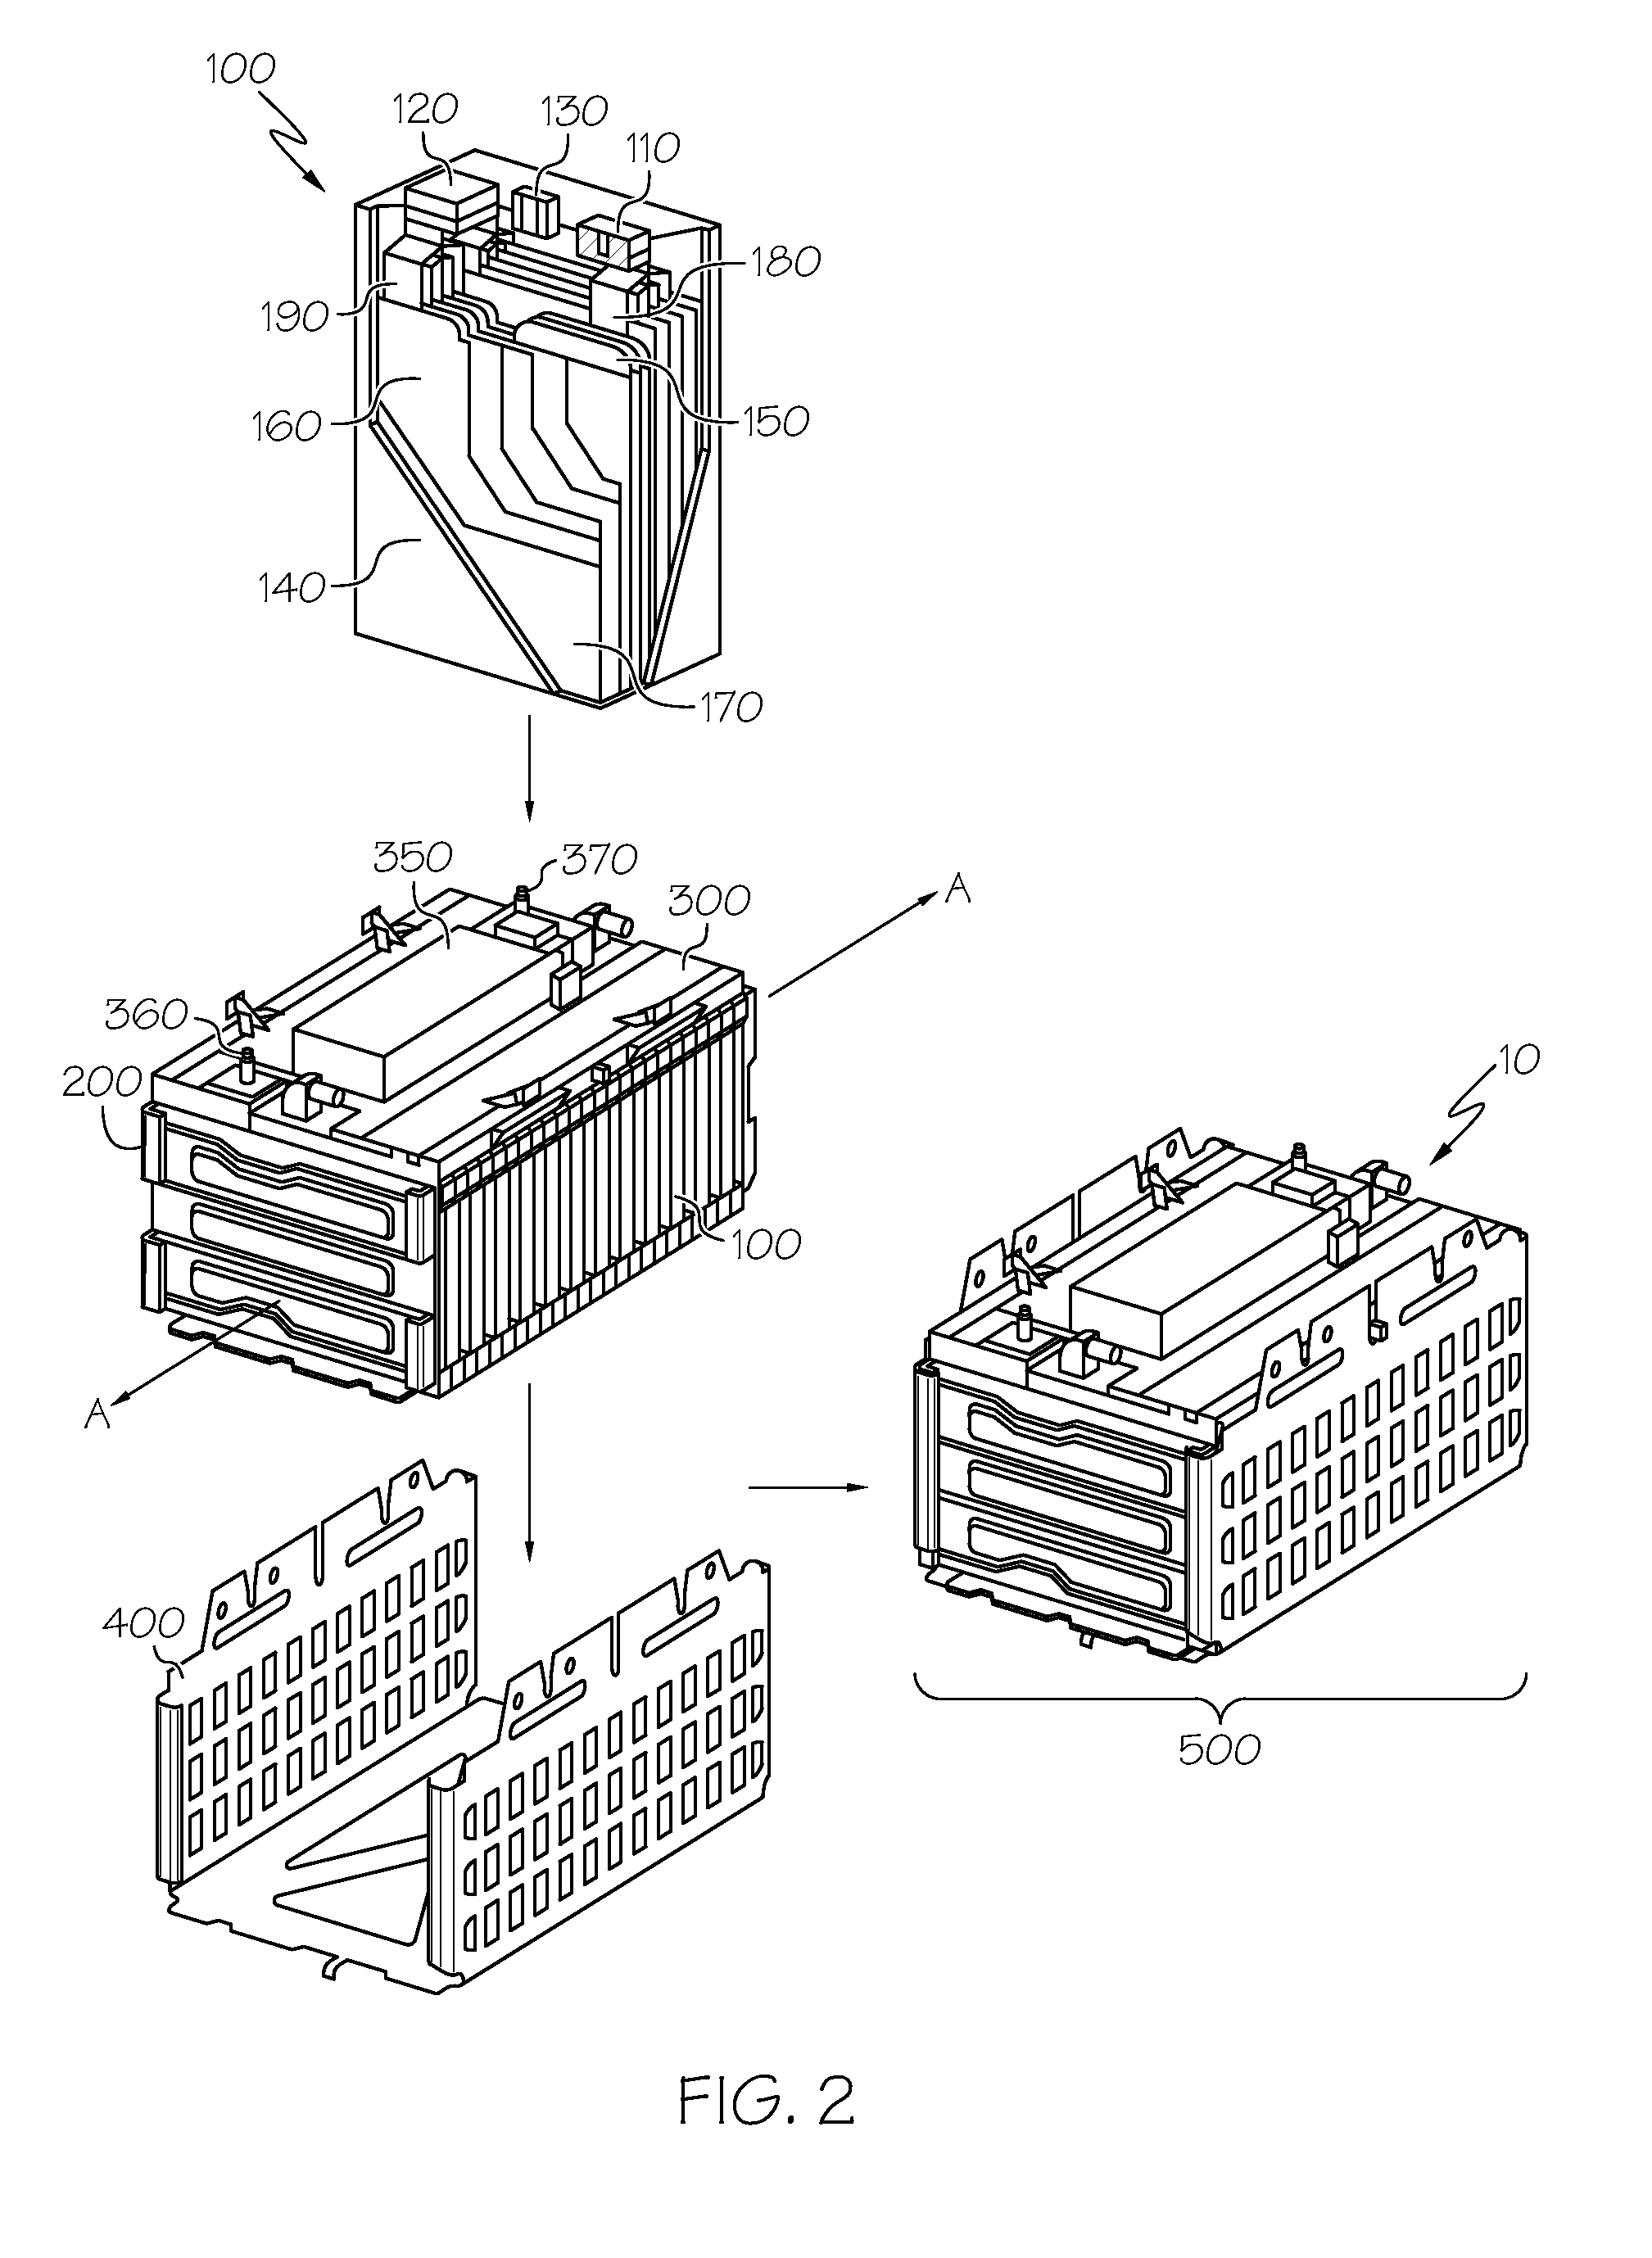 Cell cooling frames with cantilevered side seals